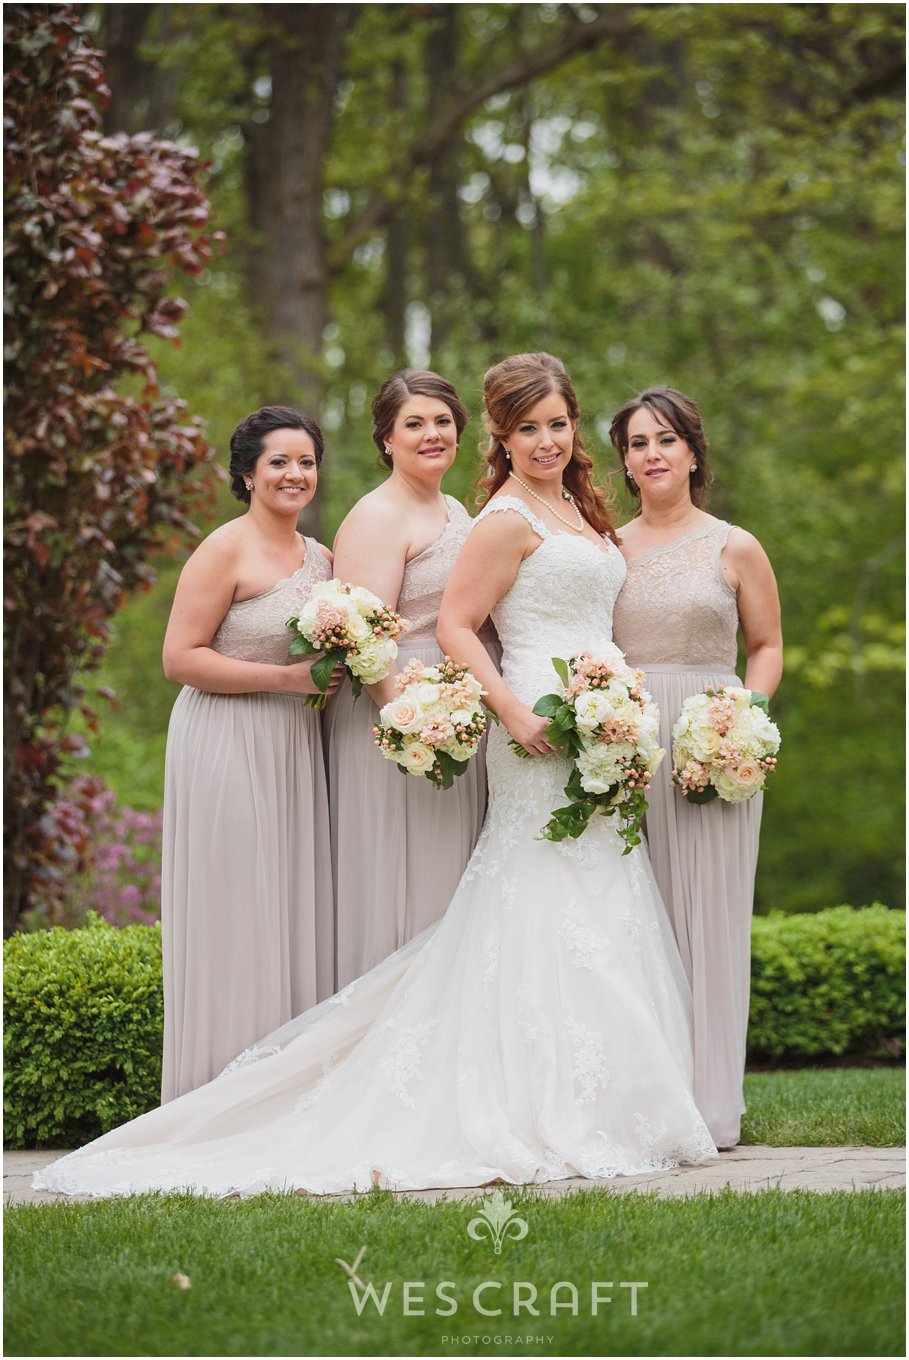 The bridesmaids wore soft flowing full length dresses in a nude neutral color. It played into the softness and natural theme at the estate.